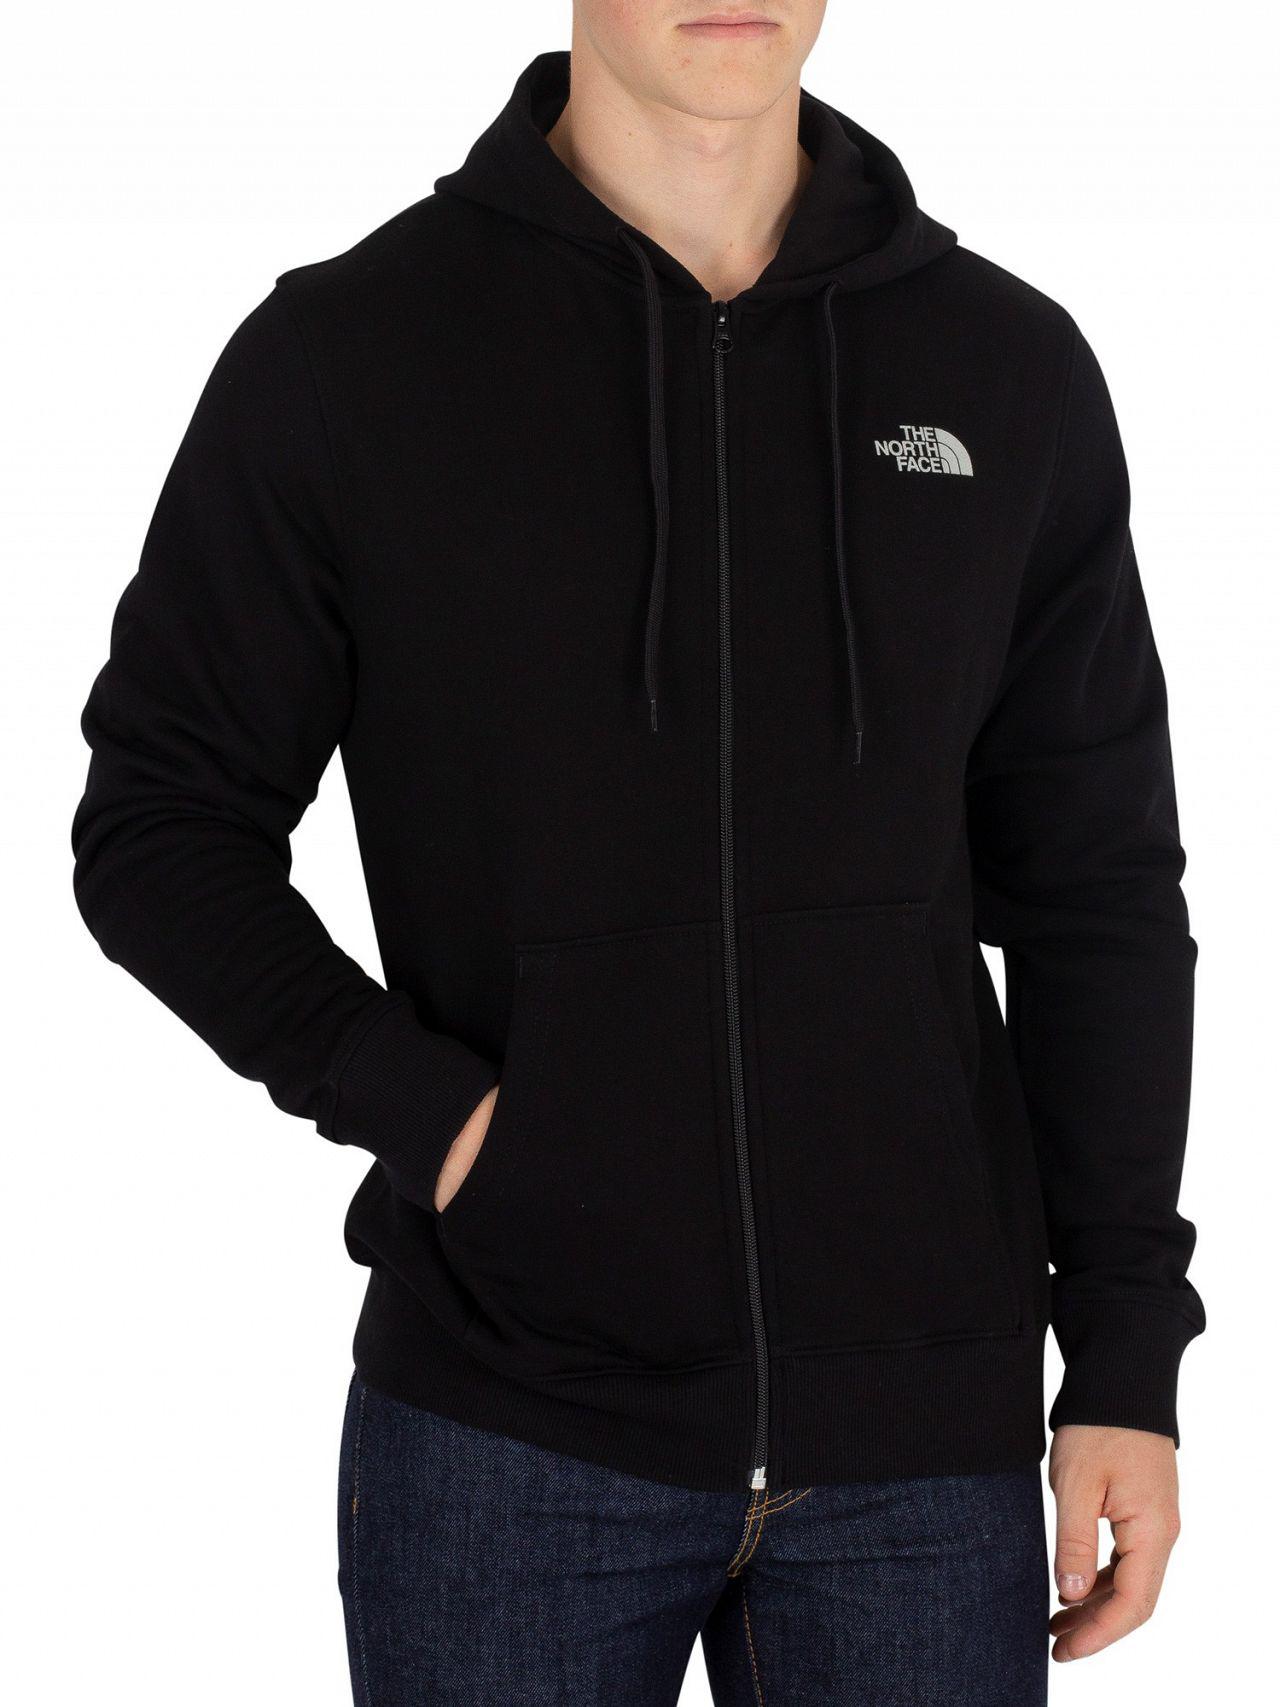 The North Face Cotton Open Gate Full Zip Hoodie in Black for Men - Lyst